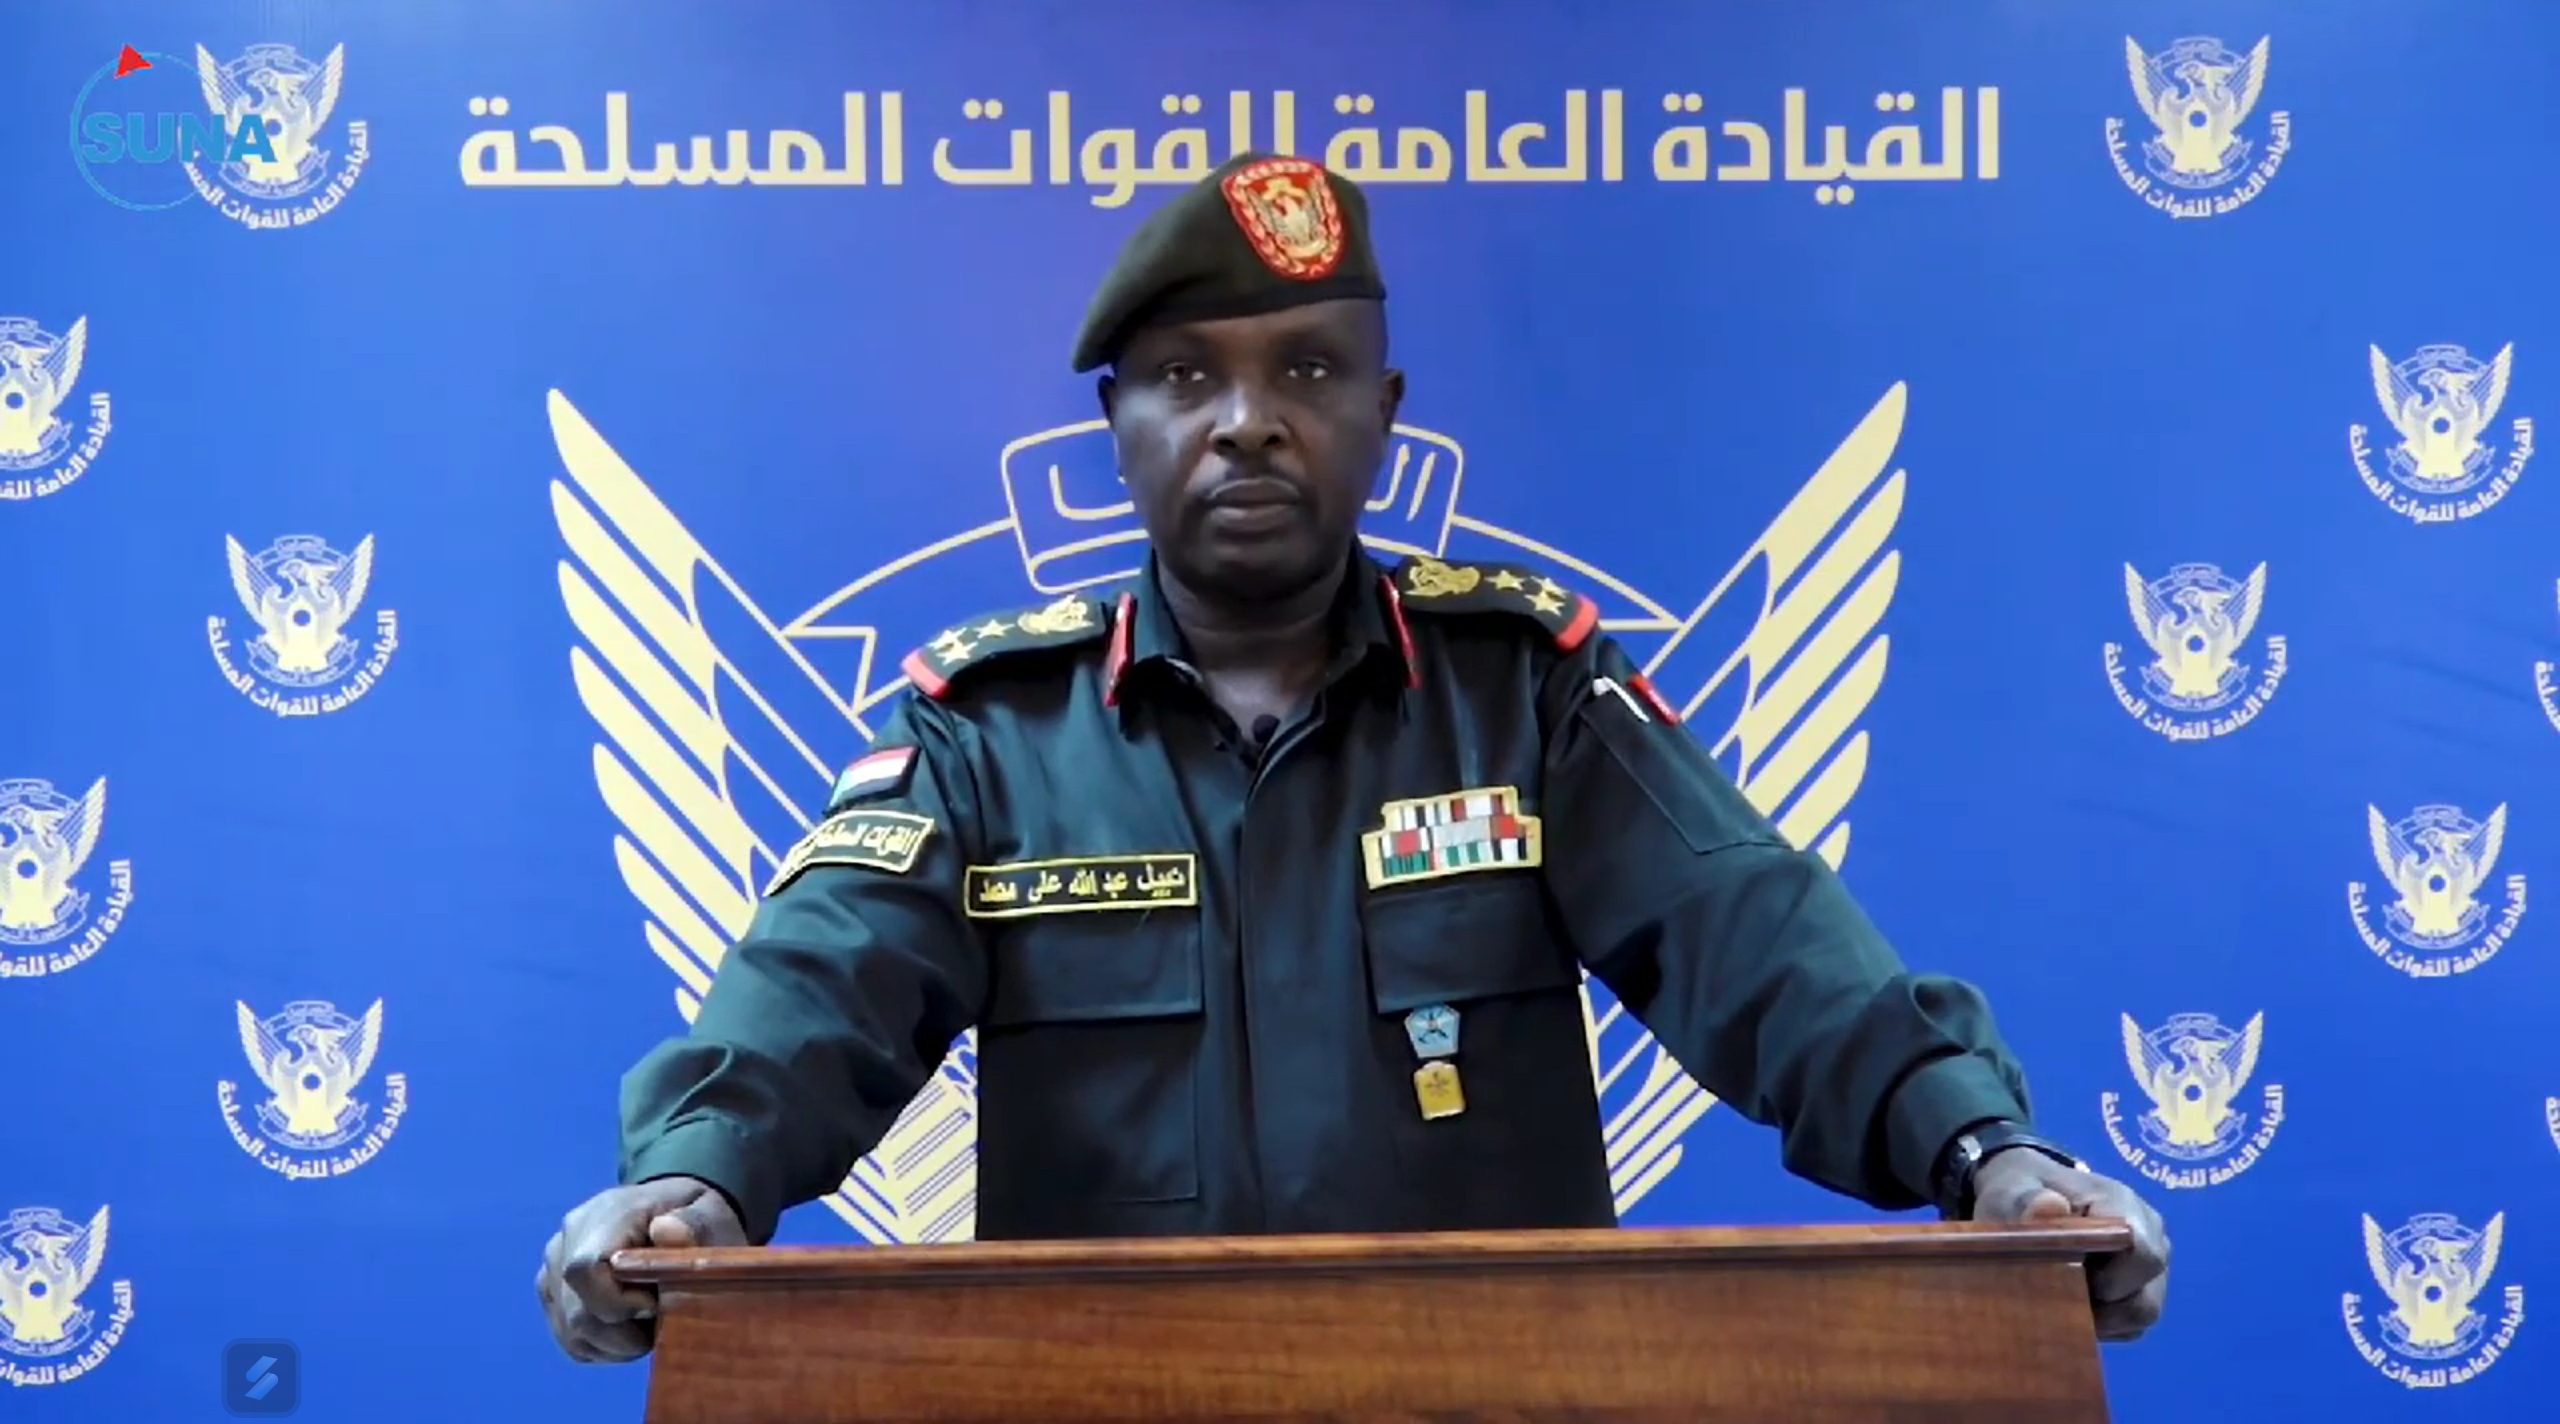 The Sudanese army denies that Egypt detained a cargo ship heading to Sudan